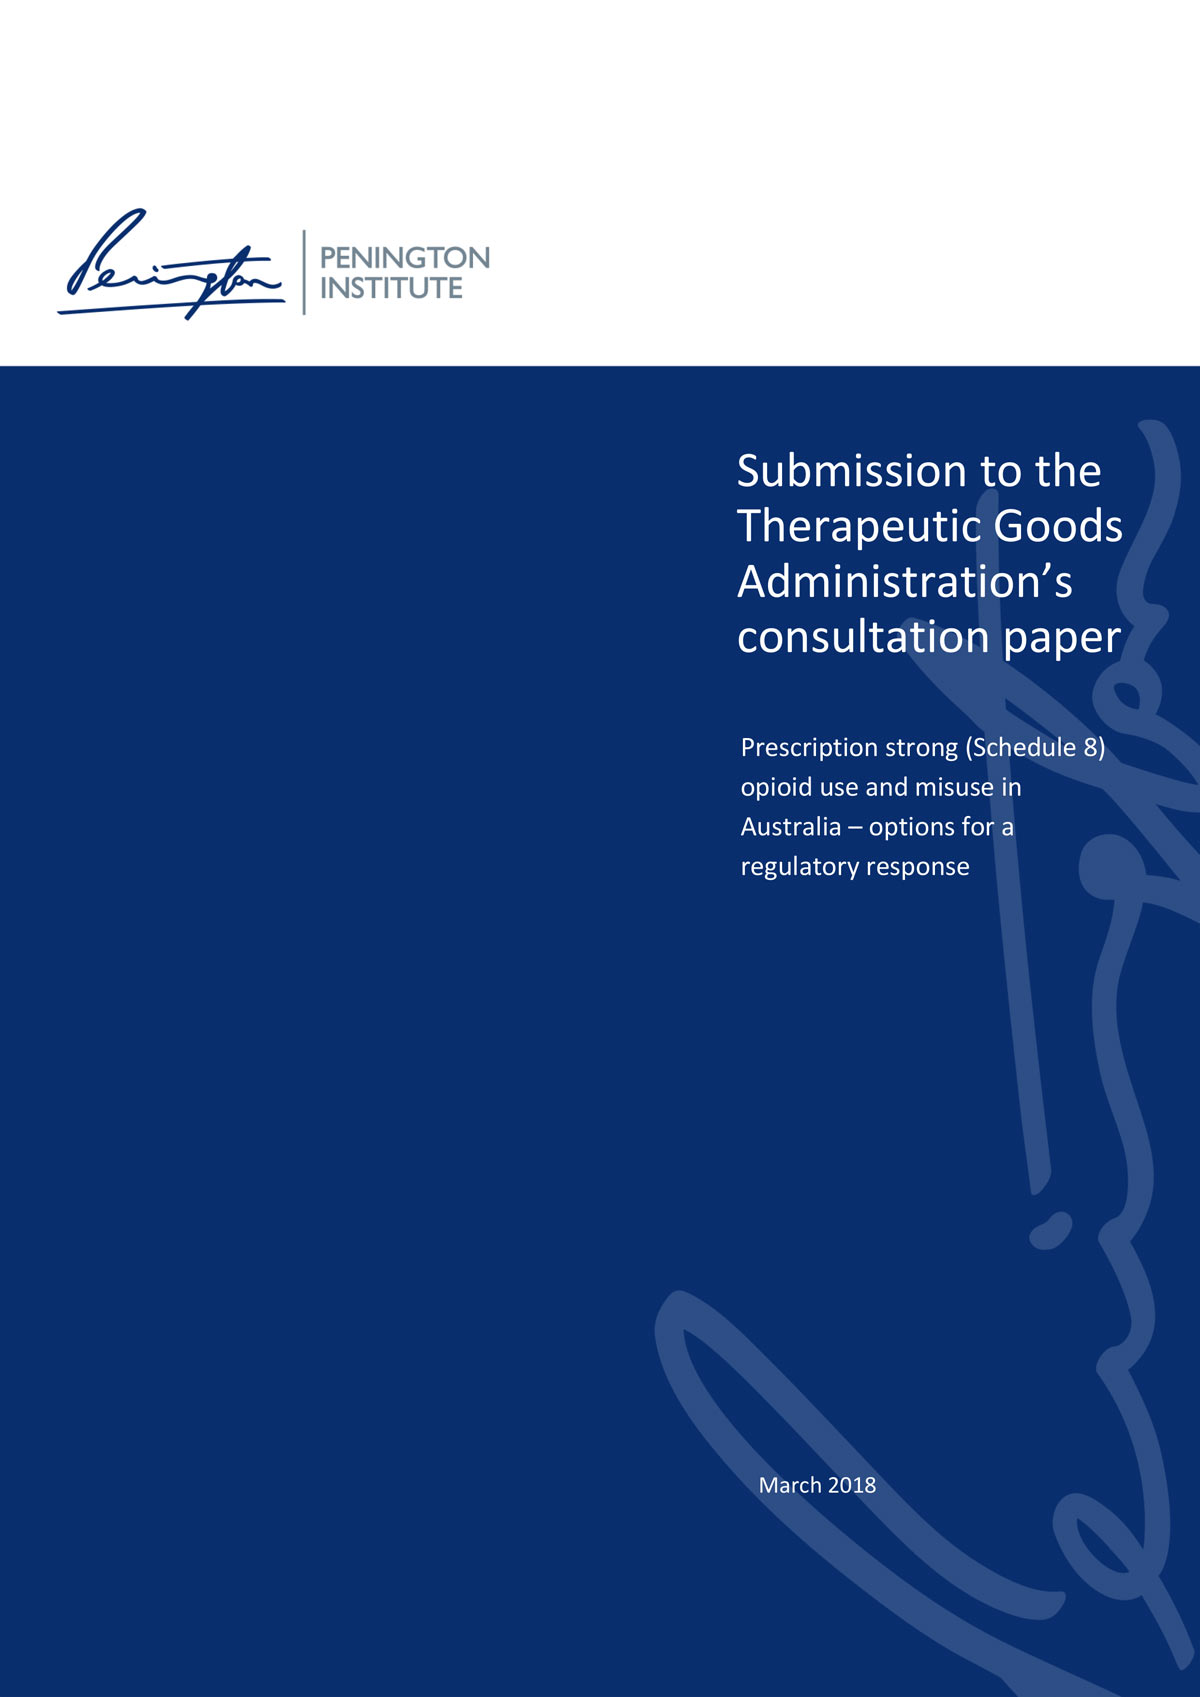 Submission to TGA Consultation Paper: Prescription strong (Schedule 8) opioid use and misuse in Australia – options for a regulatory response (2018)